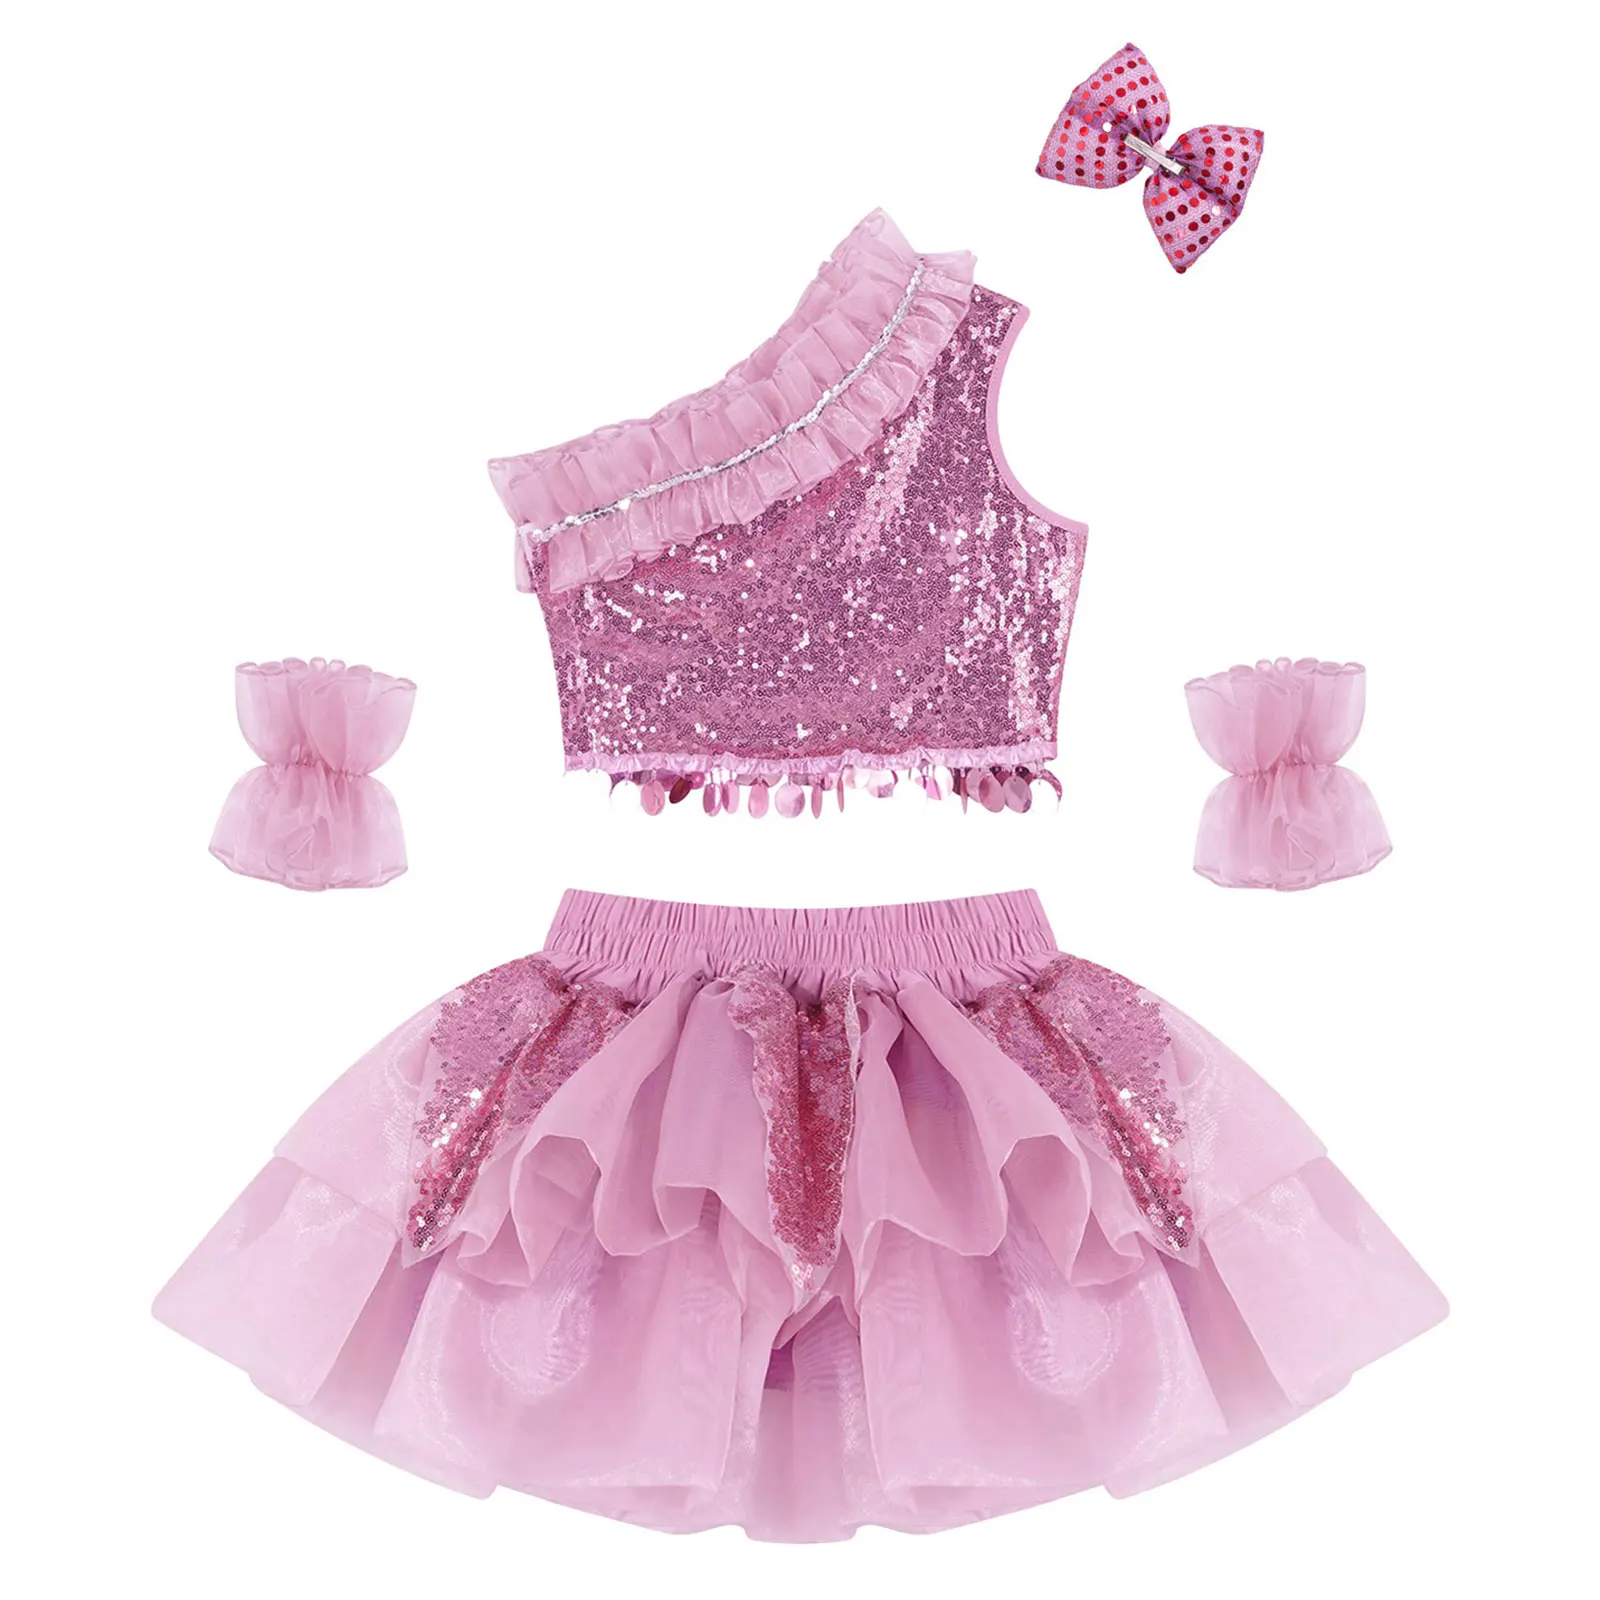 

Kids Girls Dance Costume Sequin Oblique Shoulder Tops and Veil Skirt with Bowknot Hair Clip and Cuffs Children Performance Sets